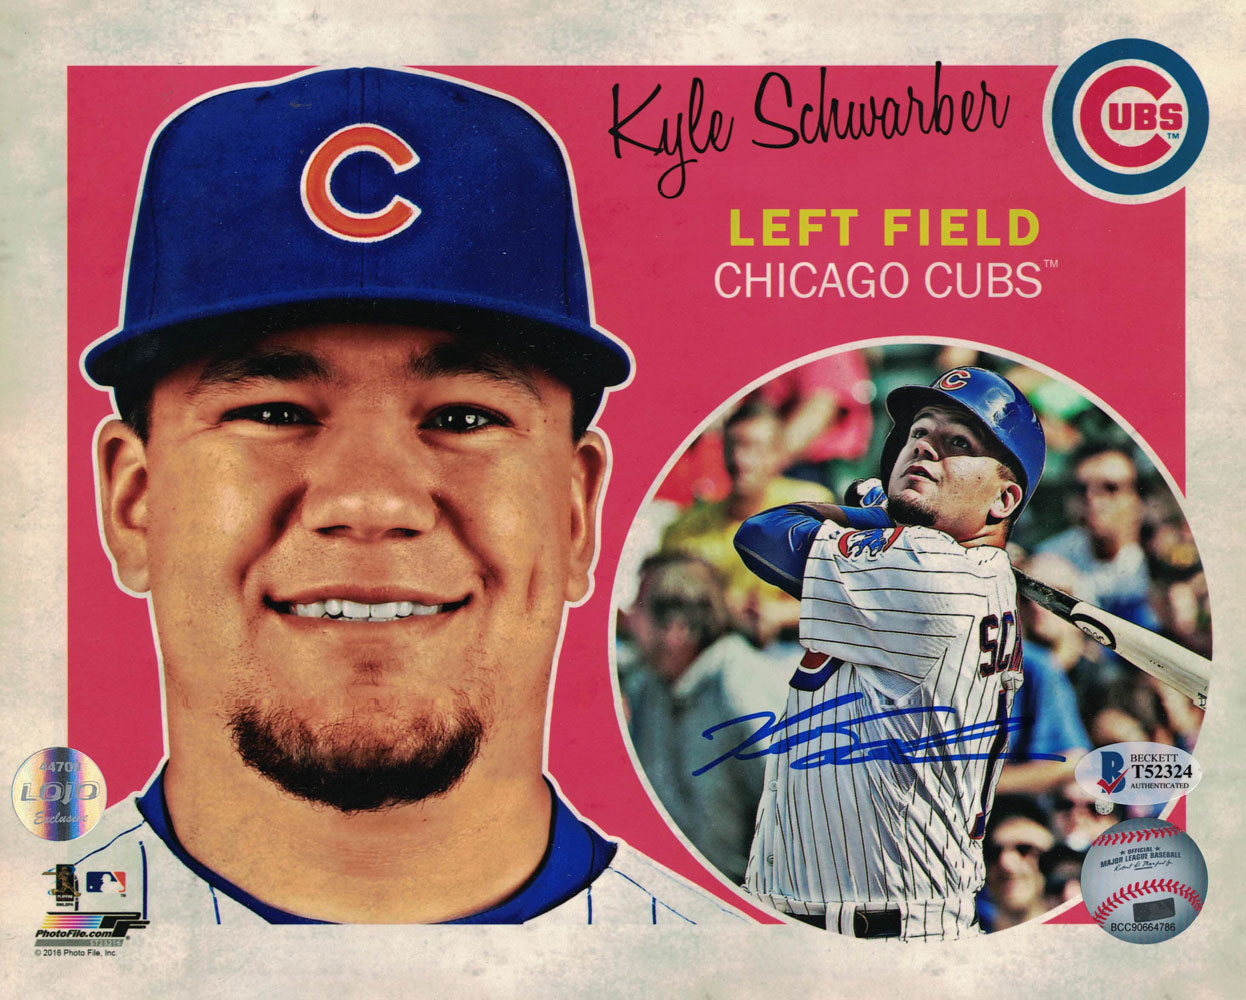 Kyle Schwarber Autographed/Signed Chicago Cubs 8x10 Photo BAS 27302 PF